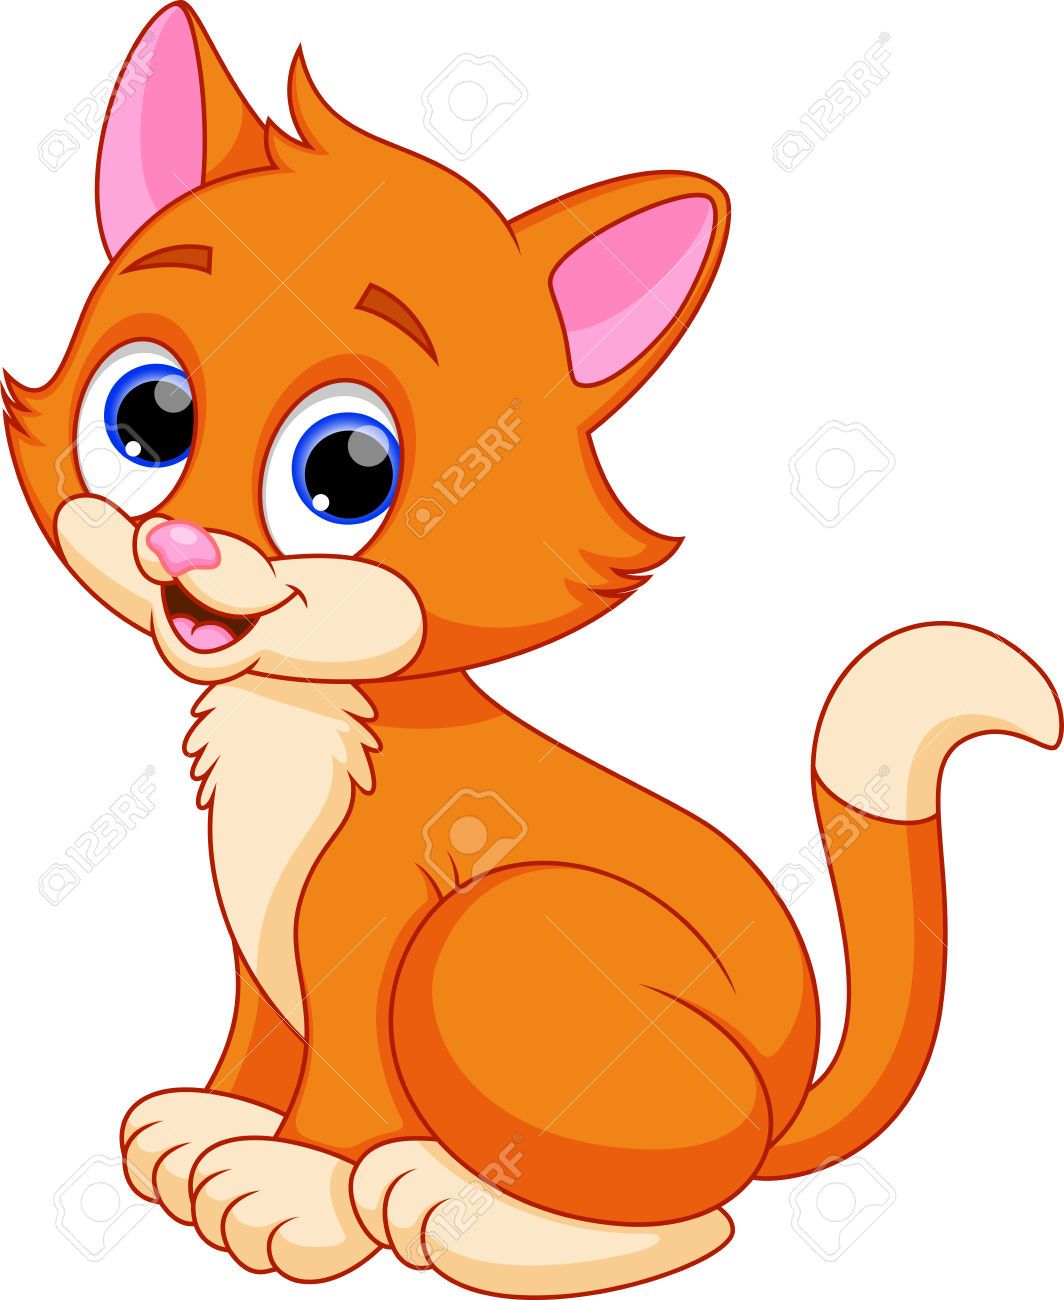 Kittens clipart purr. Purring cat images stock